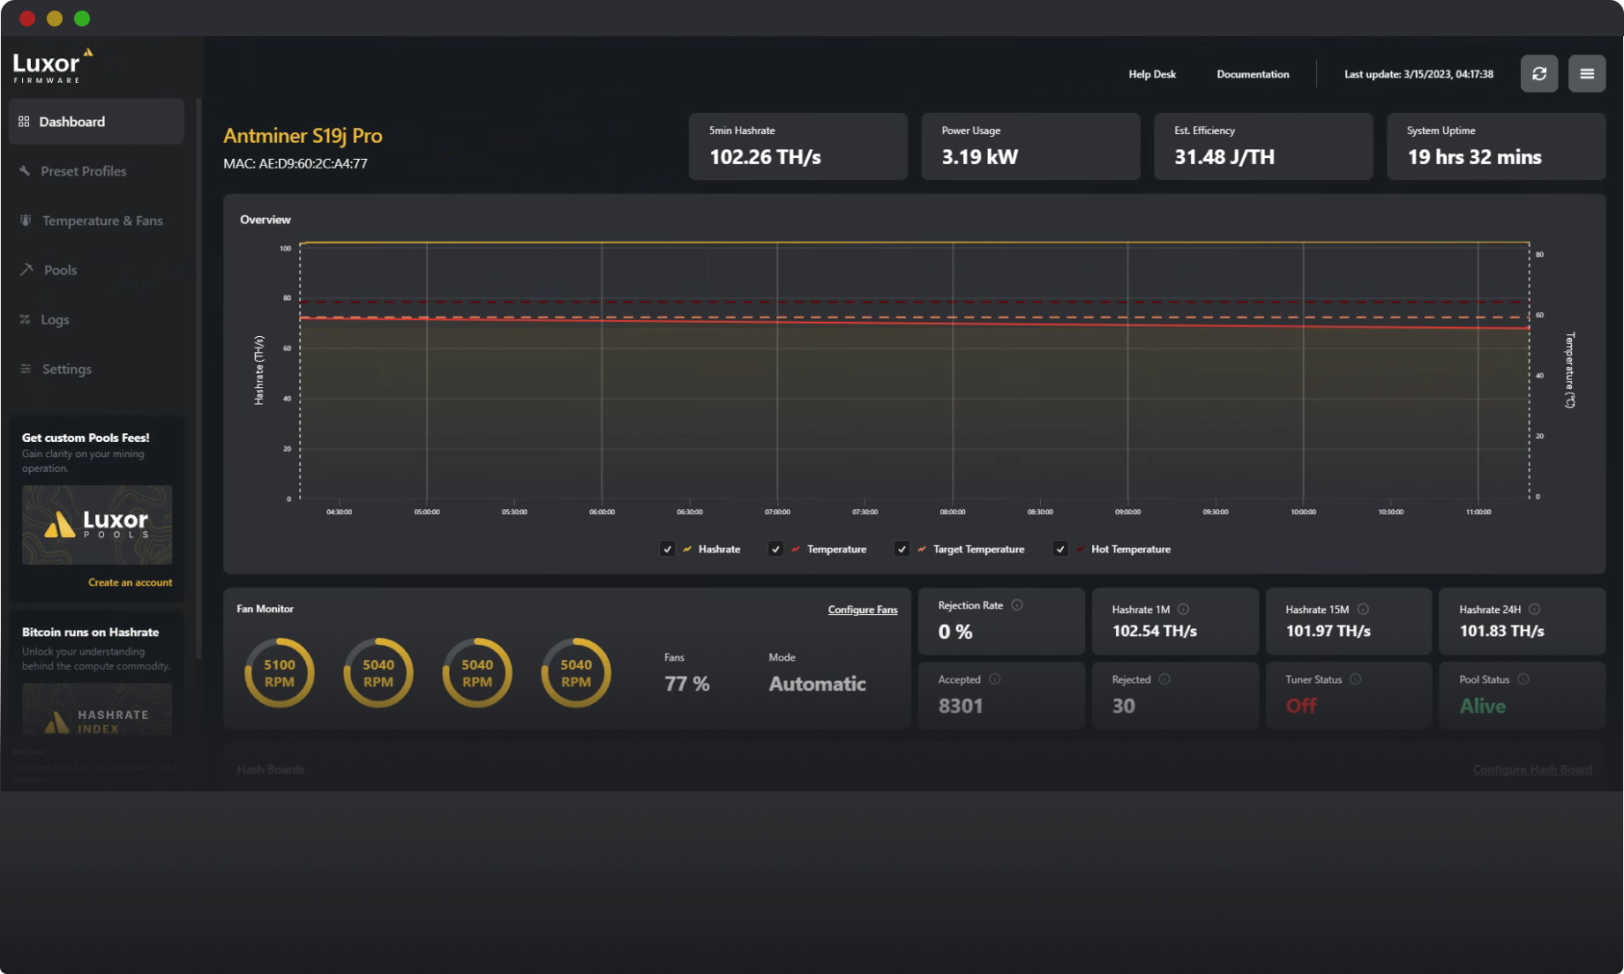 LuxOS dashboard for the Antminer S19j Pro